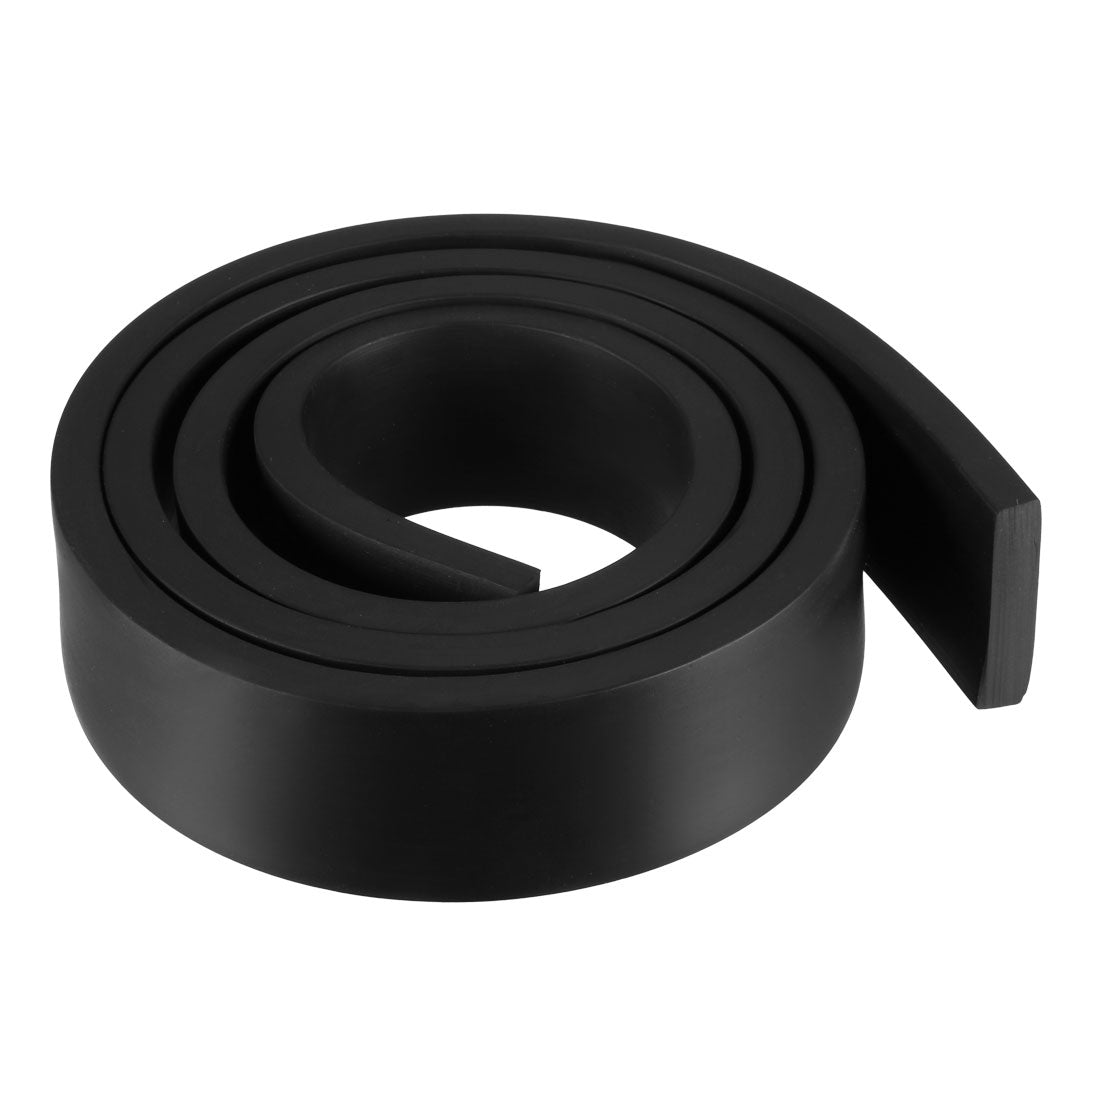 uxcell Uxcell Solid Rectangle Rubber Seal Strip 30mm Wide 7mm Thick, 1 Meter Long Black